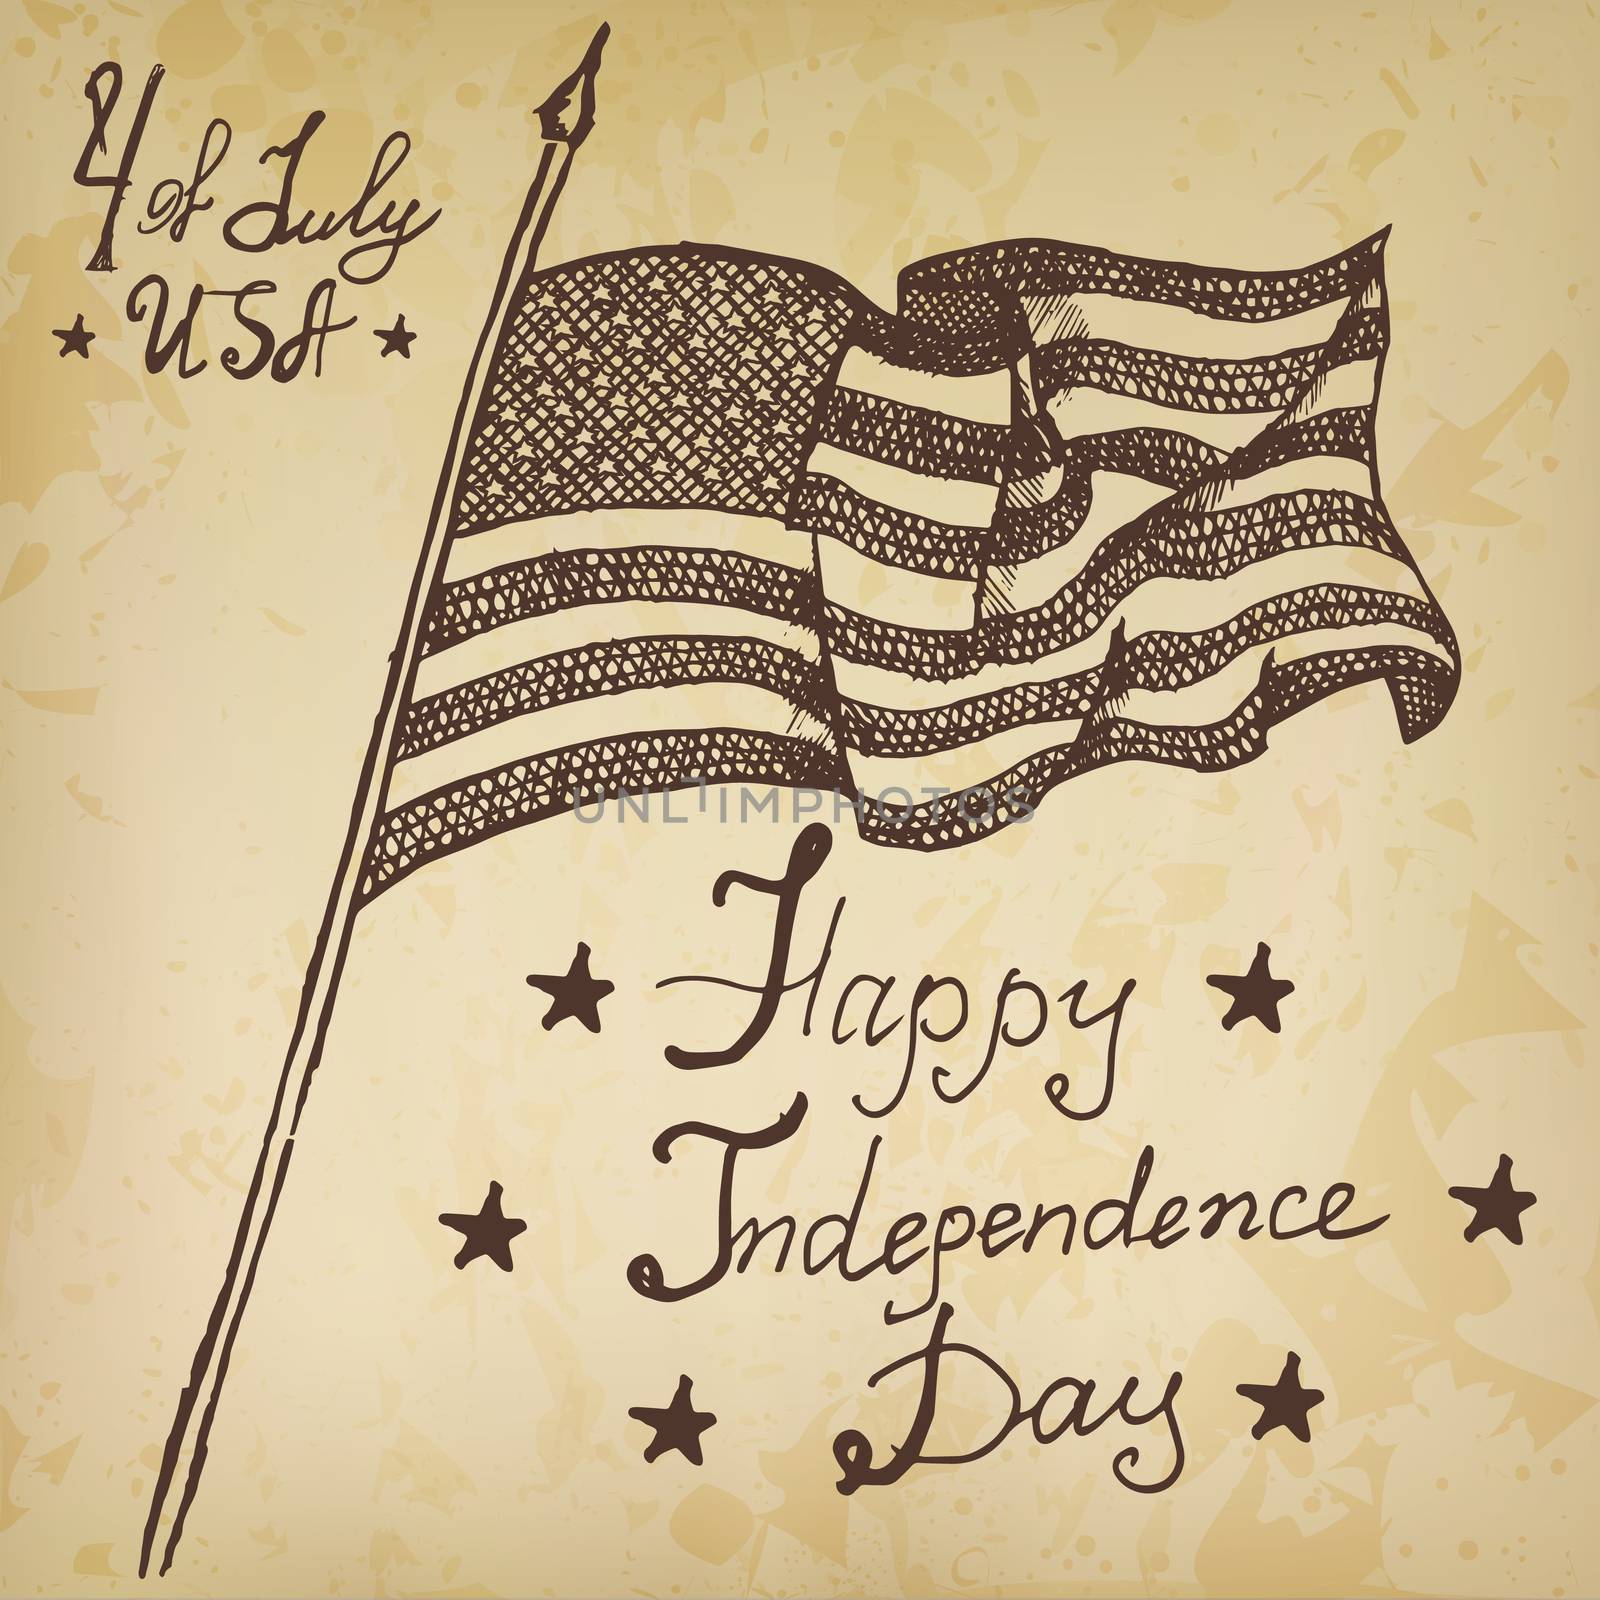 Usa waving flag, American symbol, forth of july, Hand drawn sketch, text happy independence day, vector illustration, on old paper background.